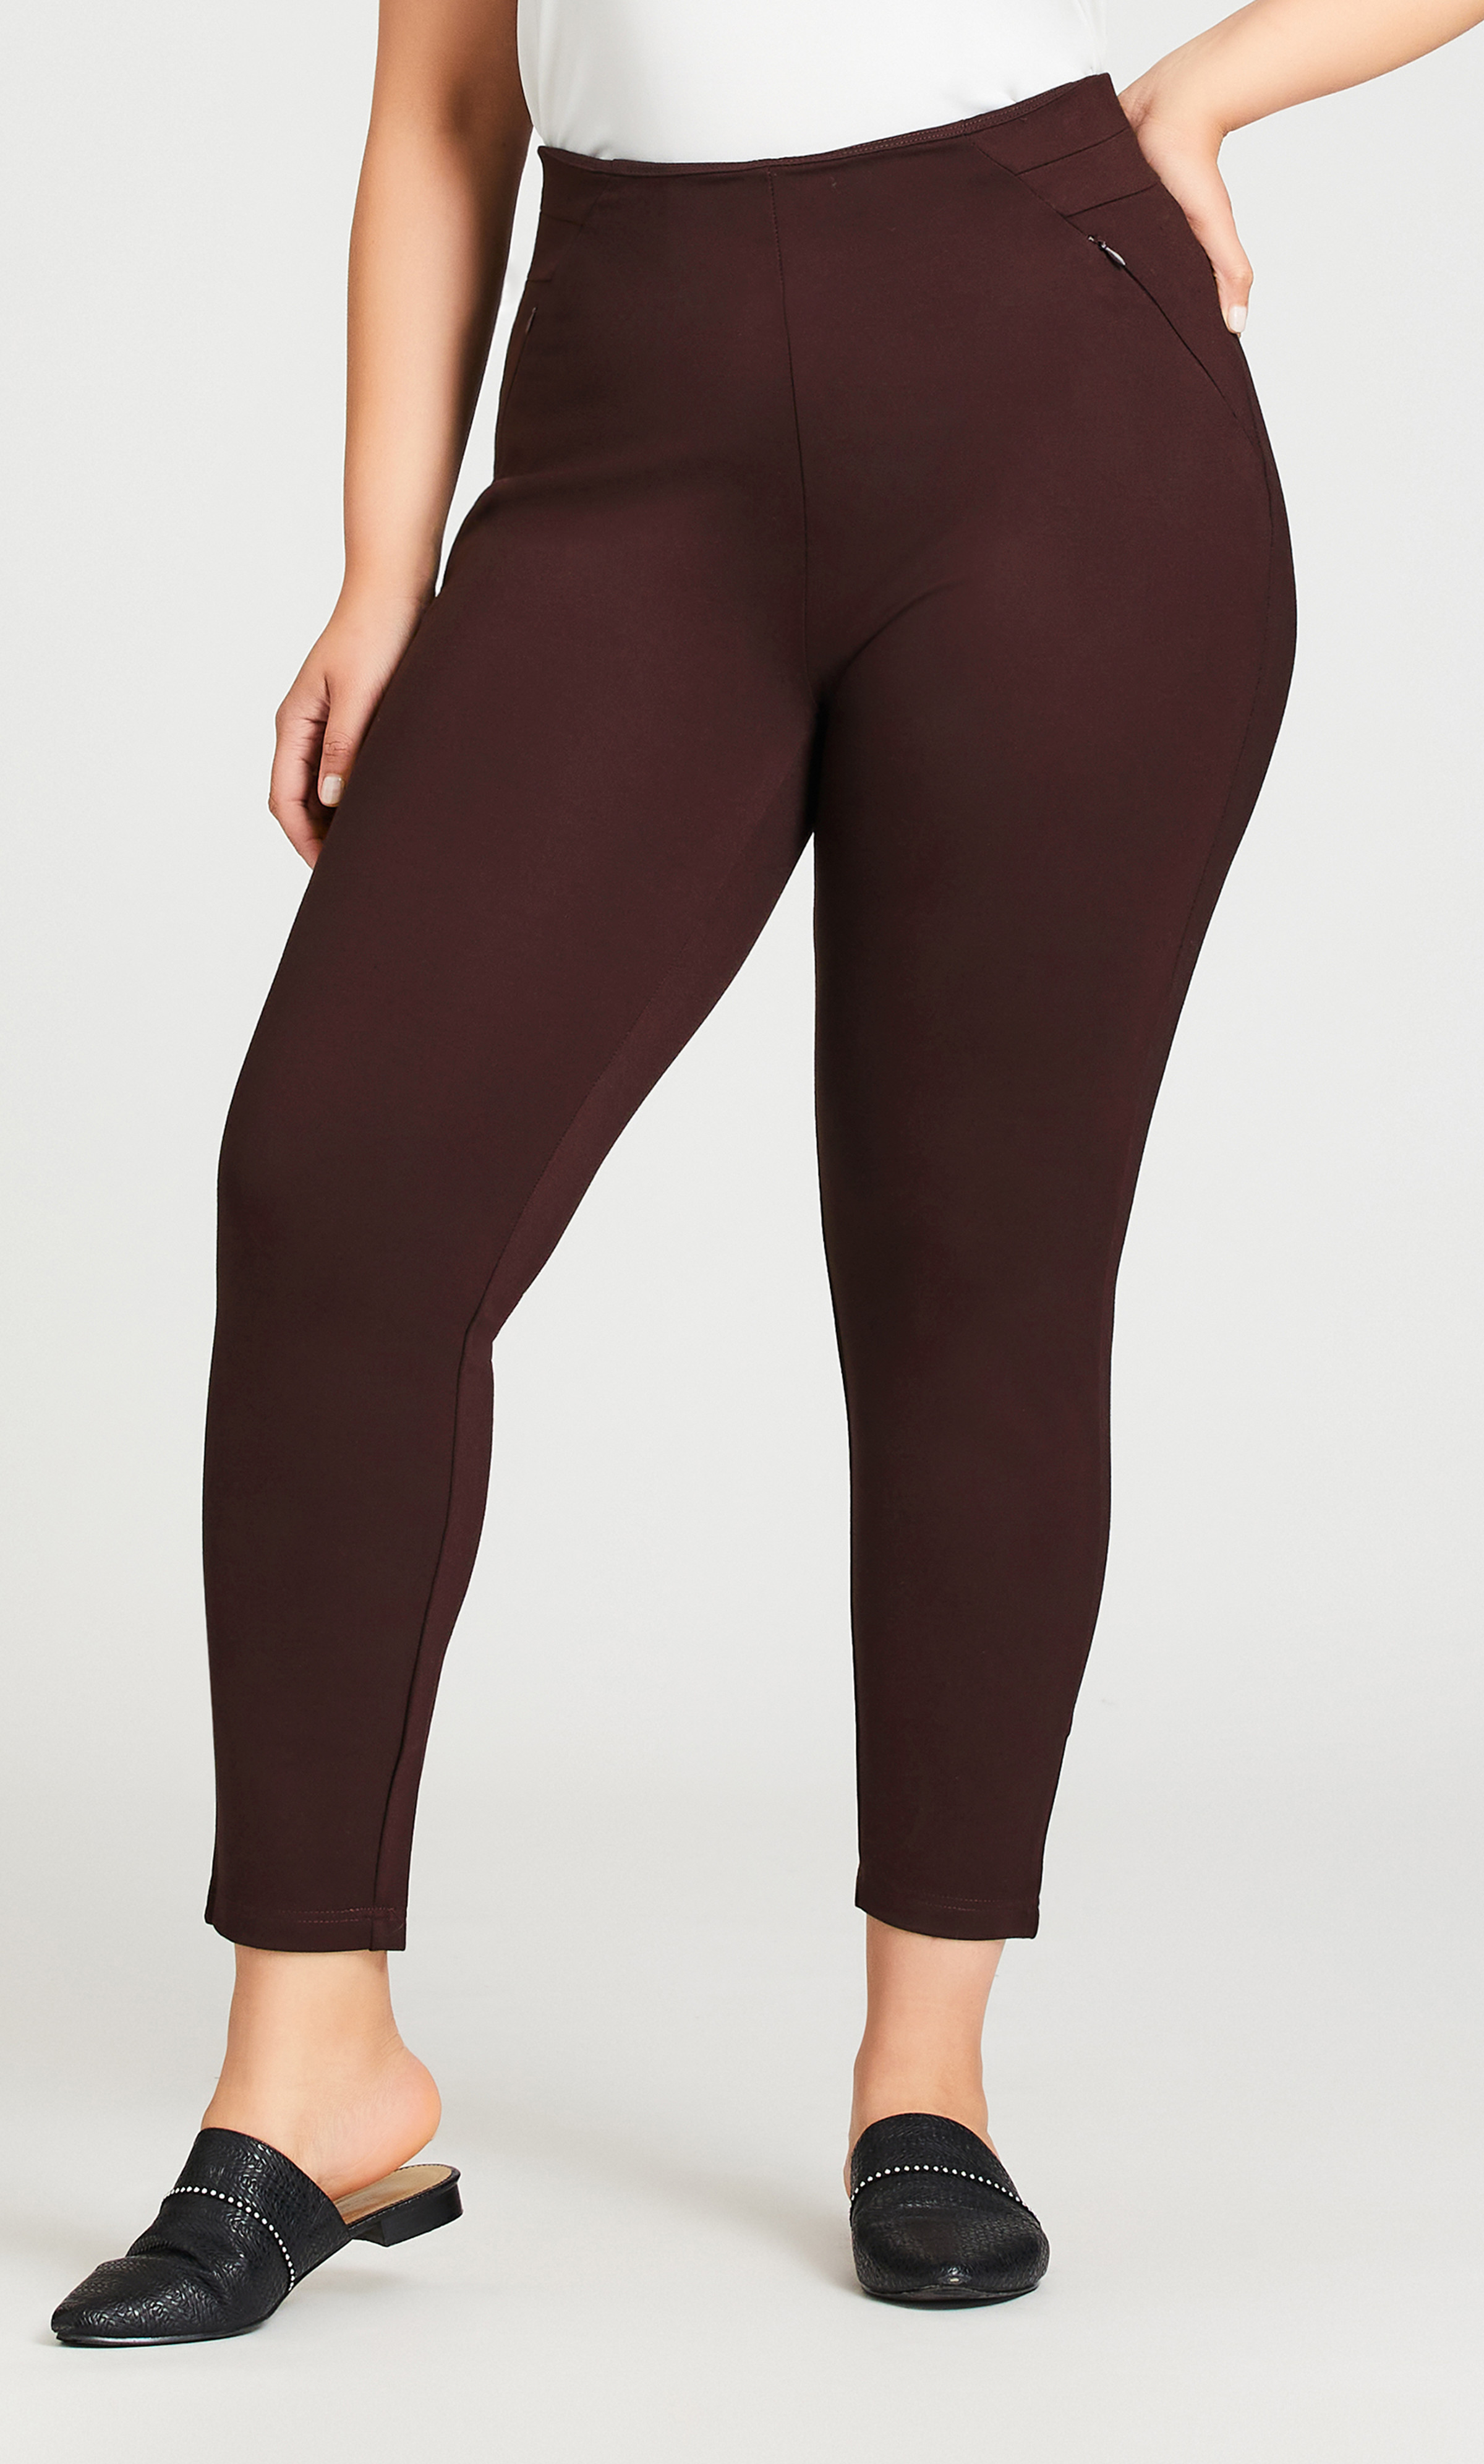 LMB Lush Moda Women's Leggings Basic Polyester - Extra Buttery Soft with  Slimming Fit for Casual Wear, Lounging, Yoga, Exercise and Layering - Many  Colors - Plus Size - Charcoal Plus Size (